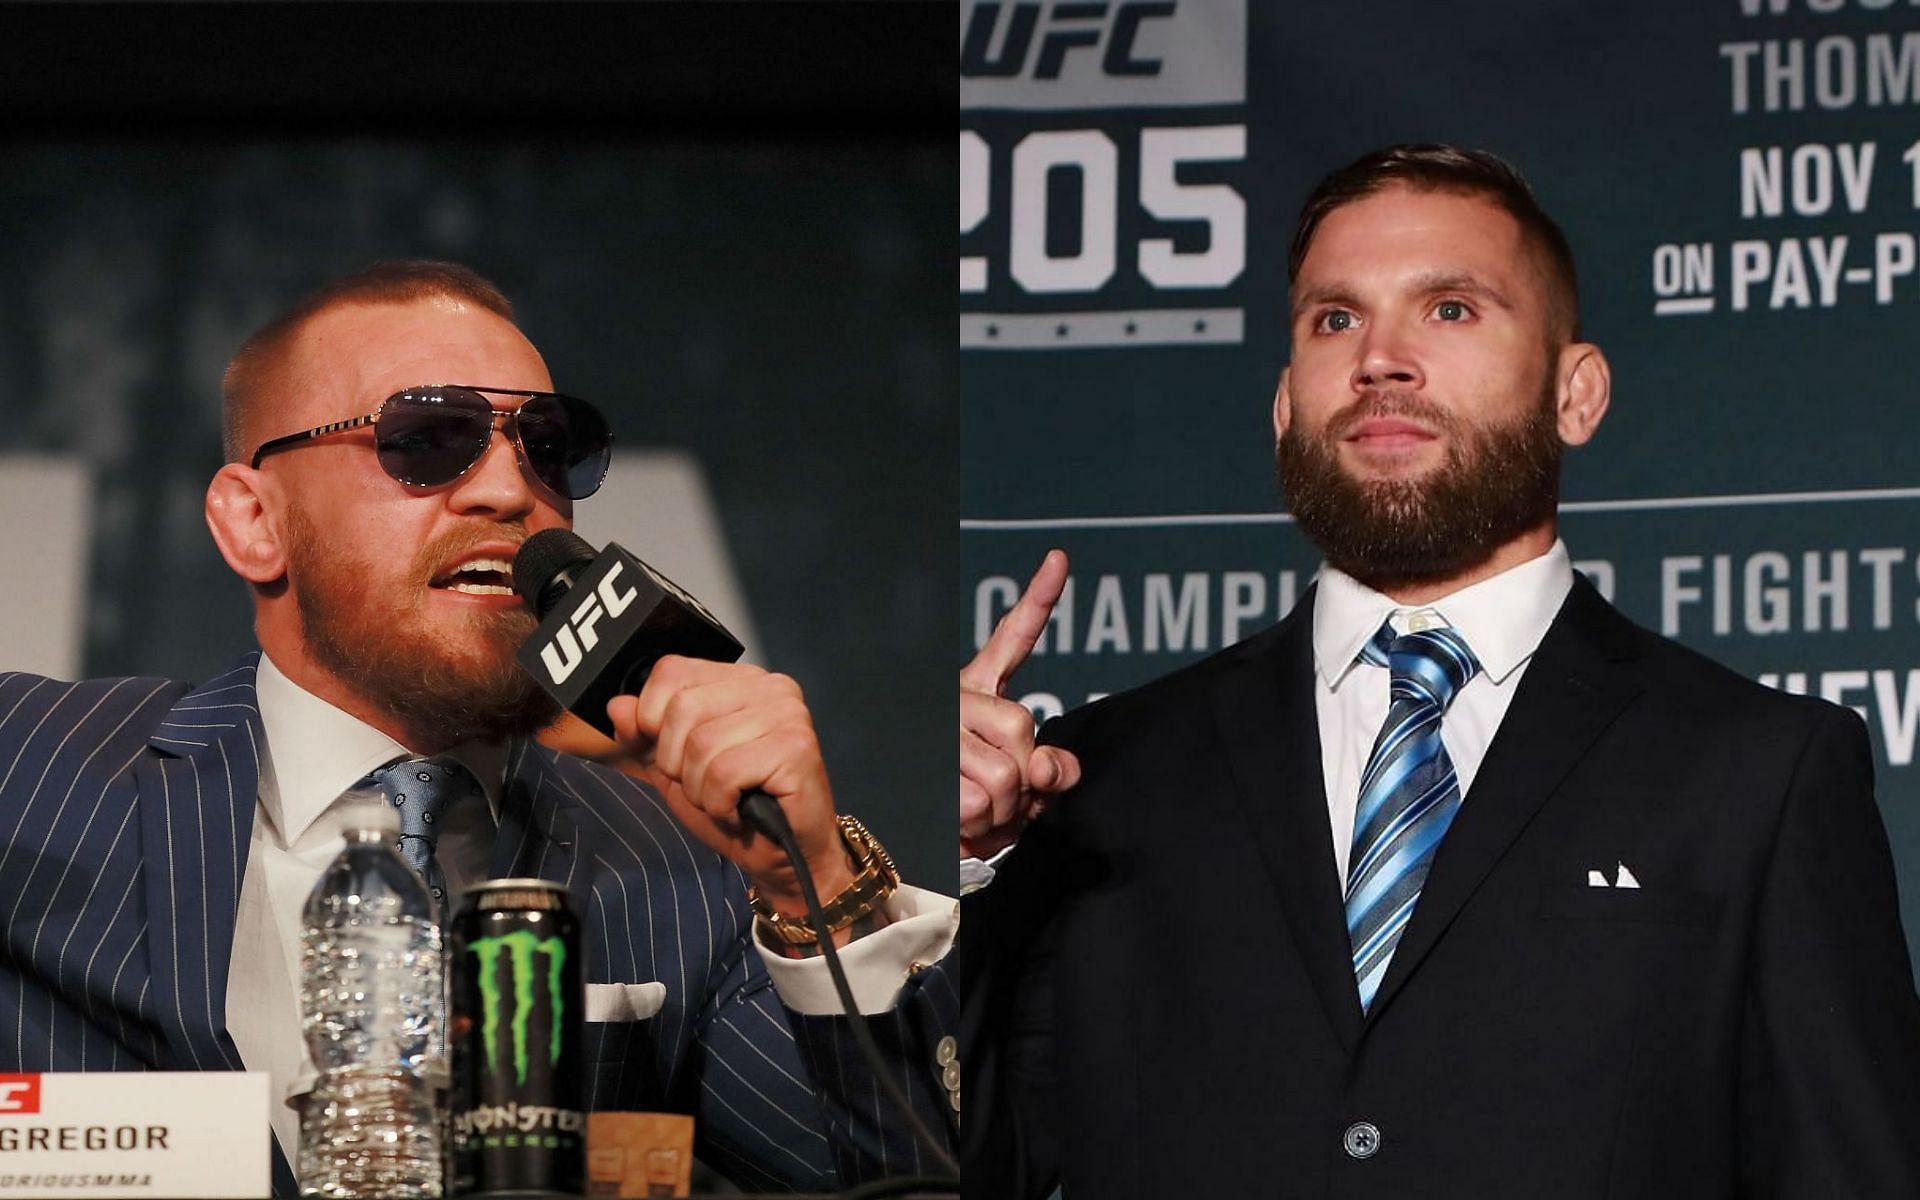 Jeremy Stephens looks back at his infamous press conference moment with Conor McGregor